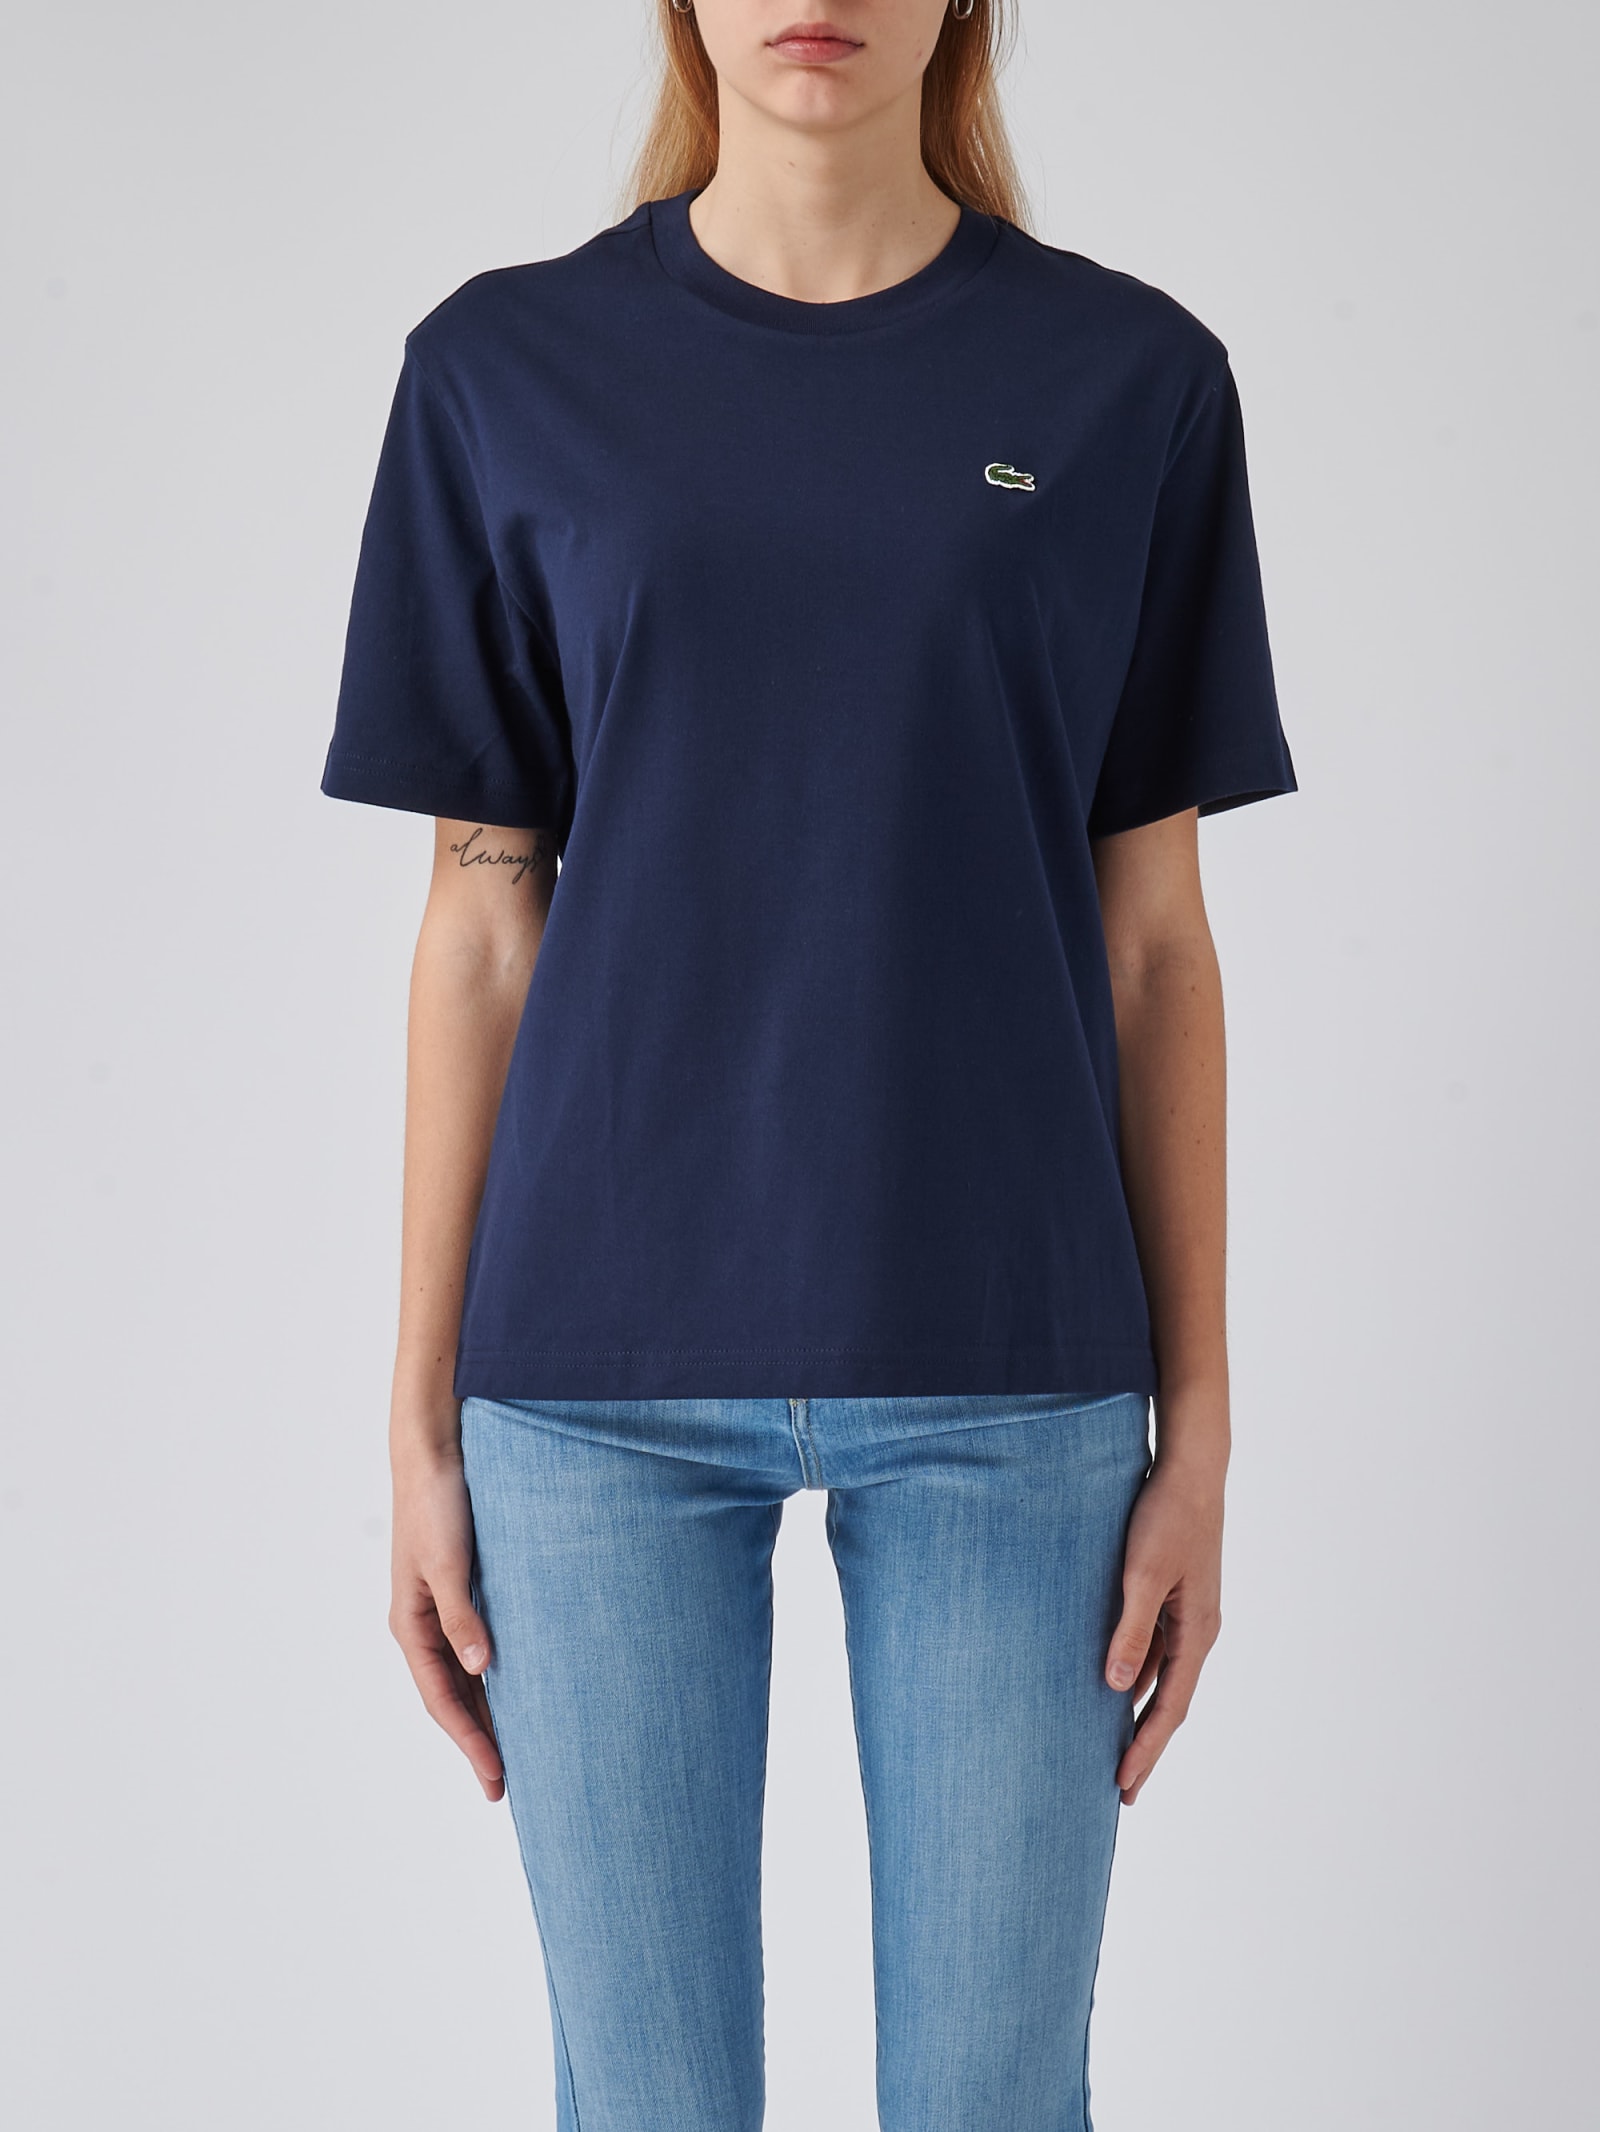 Lacoste Cotton T-shirt In Navy